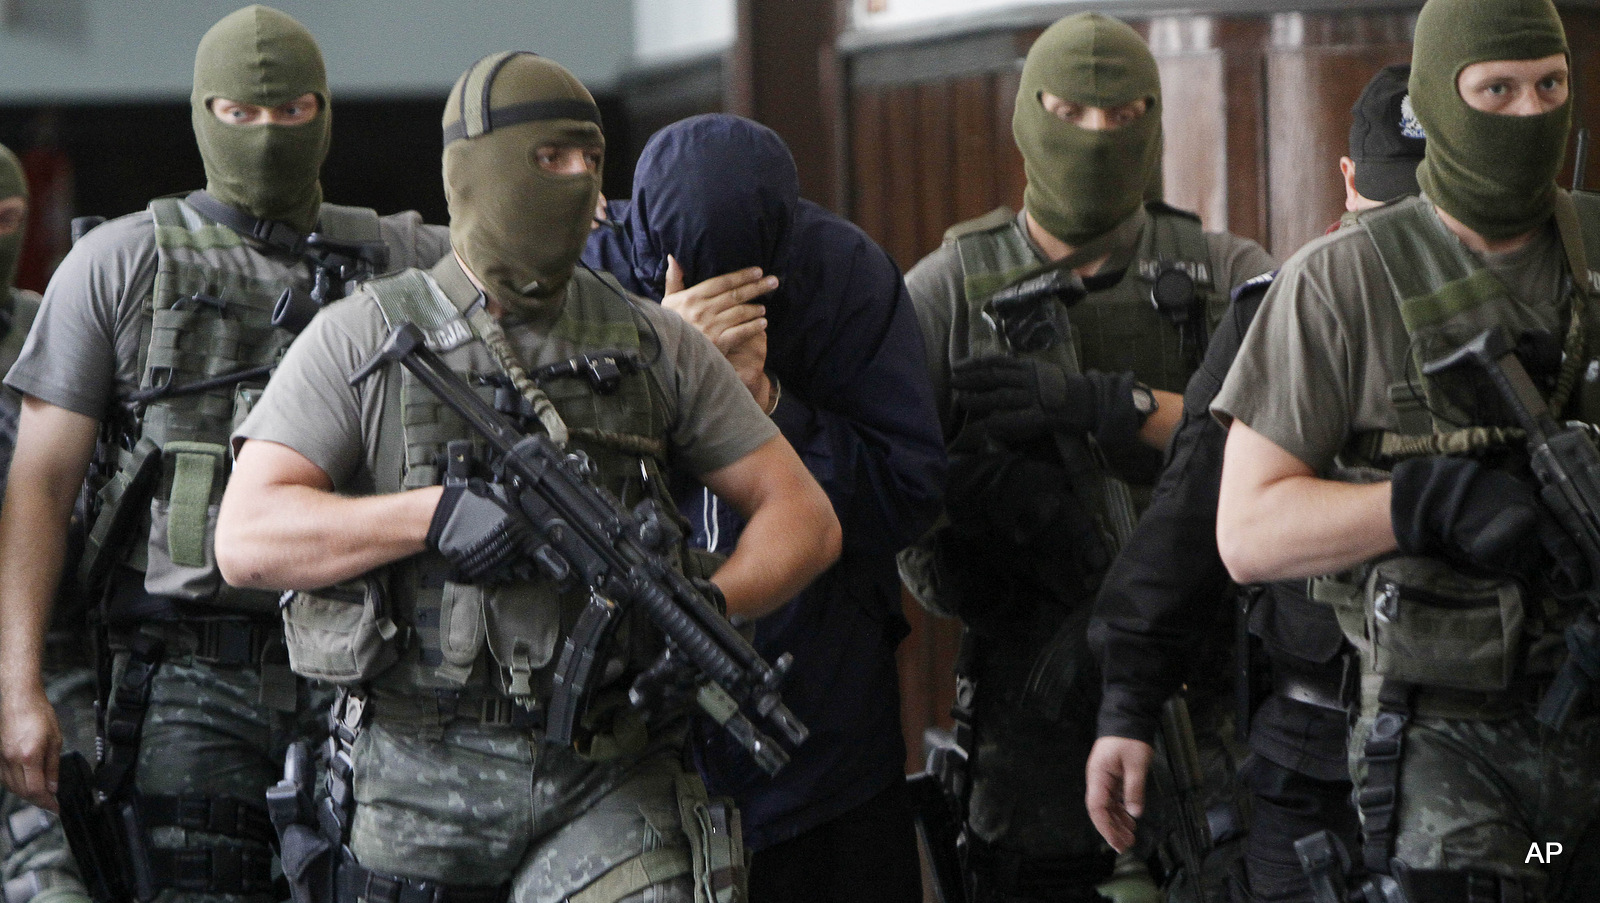 Israeli citizen Uri Brodsky, center, covers his face as he is escorted by anti-terrorist force members into court in Warsaw, Poland, on Wednesday, July 7, 2010, where he was ordered to be extradited to Germany, suspected of being a Mossad agent involved in the slaying of an alleged Hamas operative. 